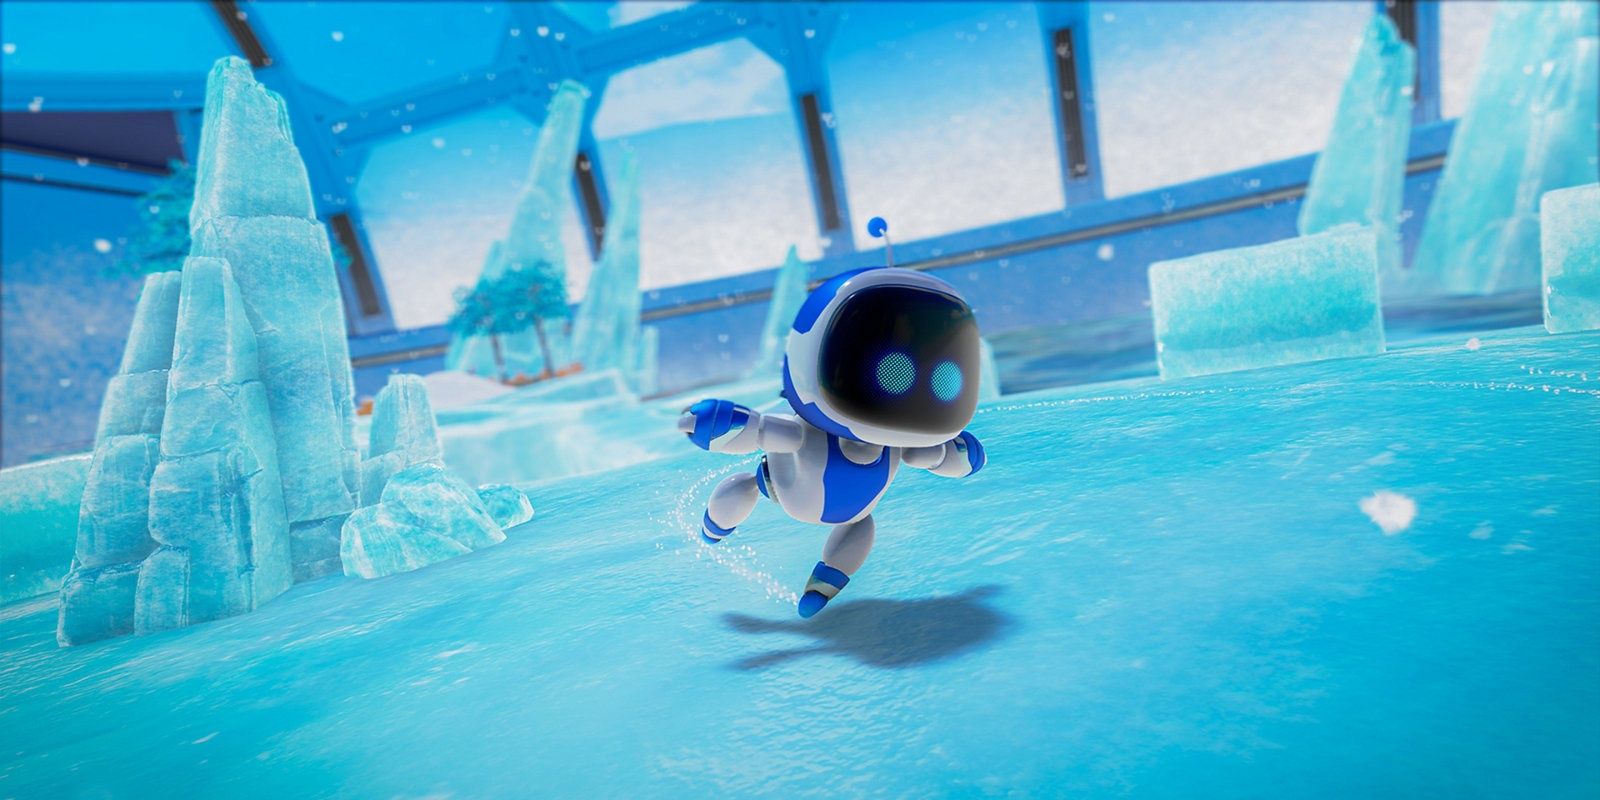 A screenshot showing Astro Bot skating on ice in Astro's Playroom